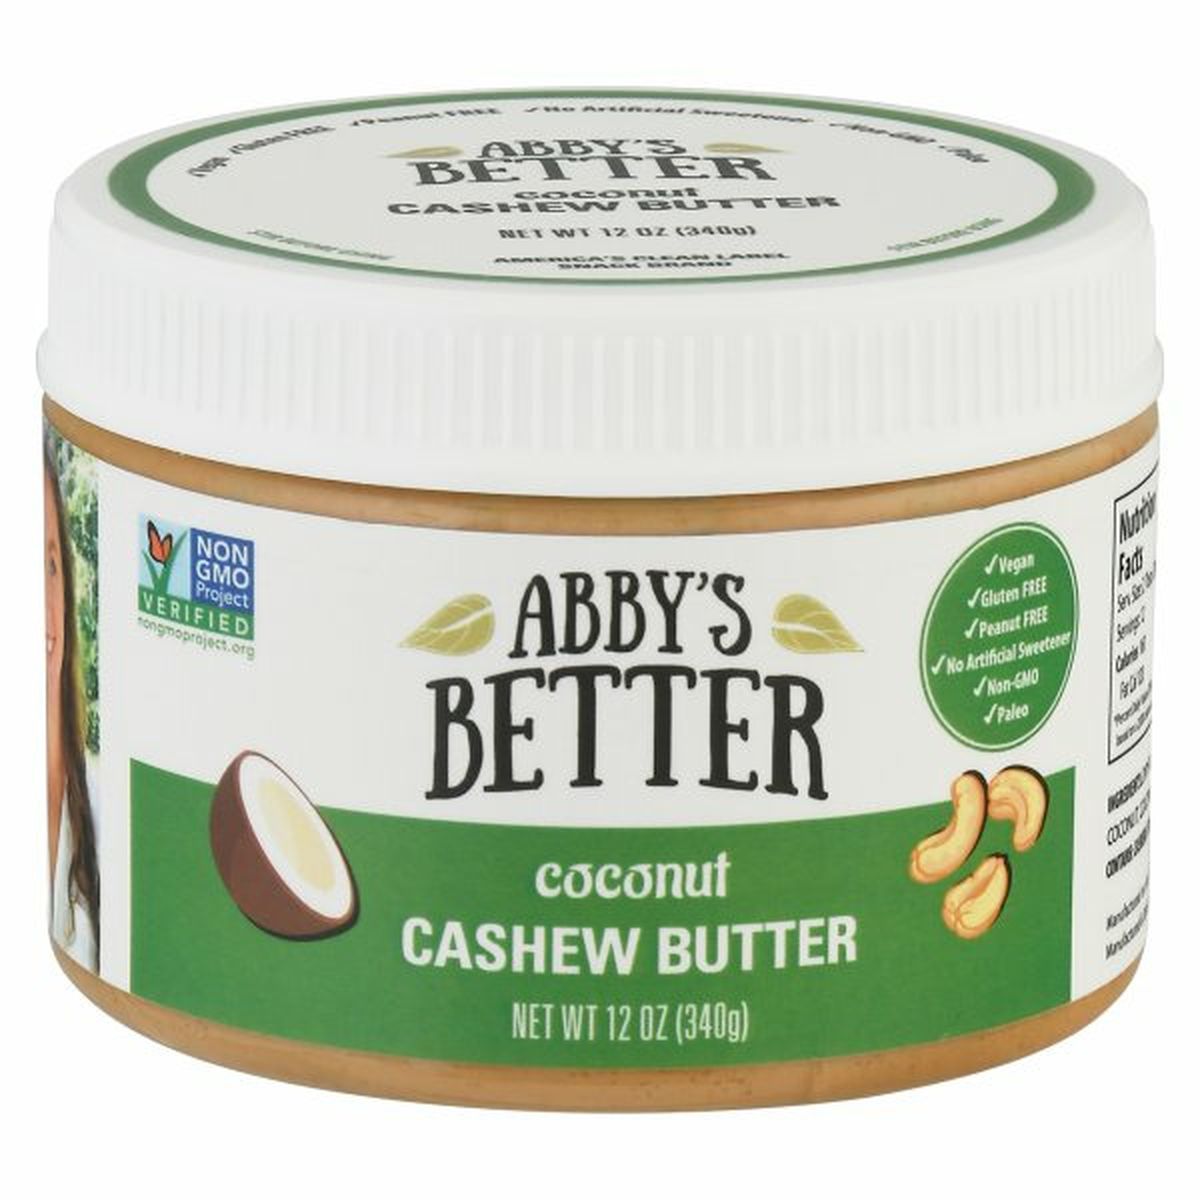 Calories in Abby's Better Cashew Butter, Coconut